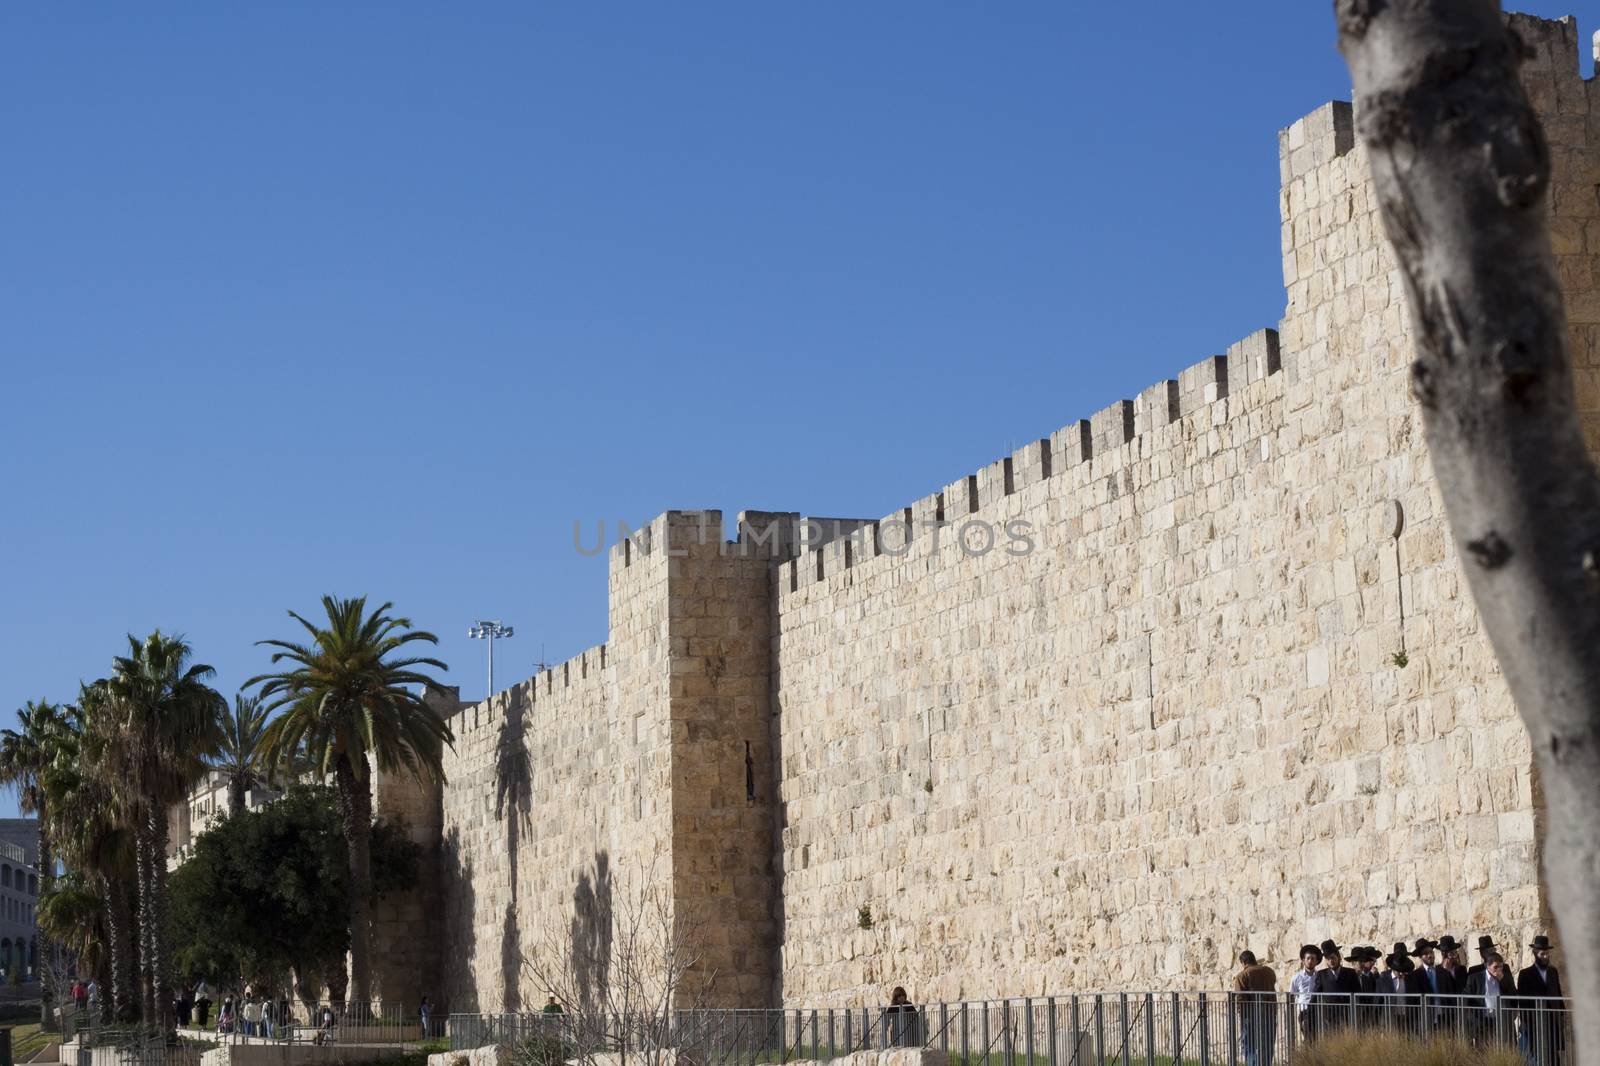 jerusalem outer wall with  some people